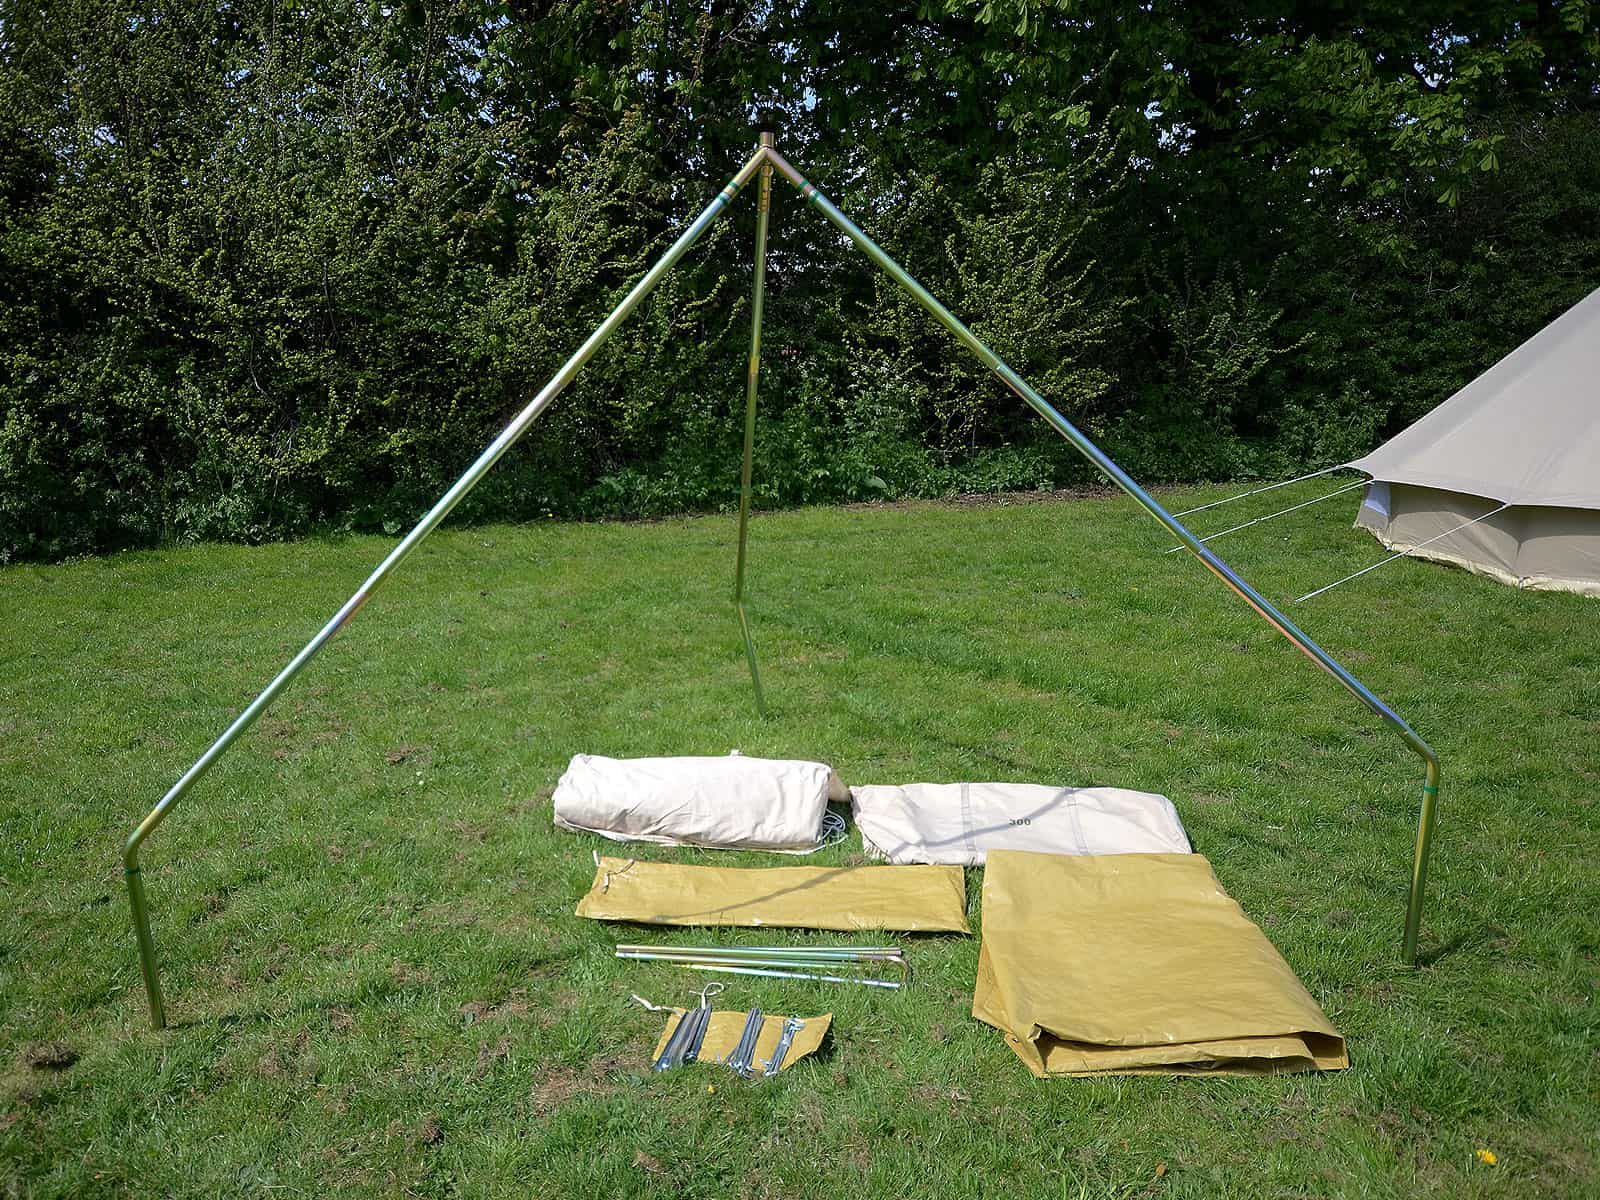 Features tripod pole system, groundsheet, canvas and pegs.